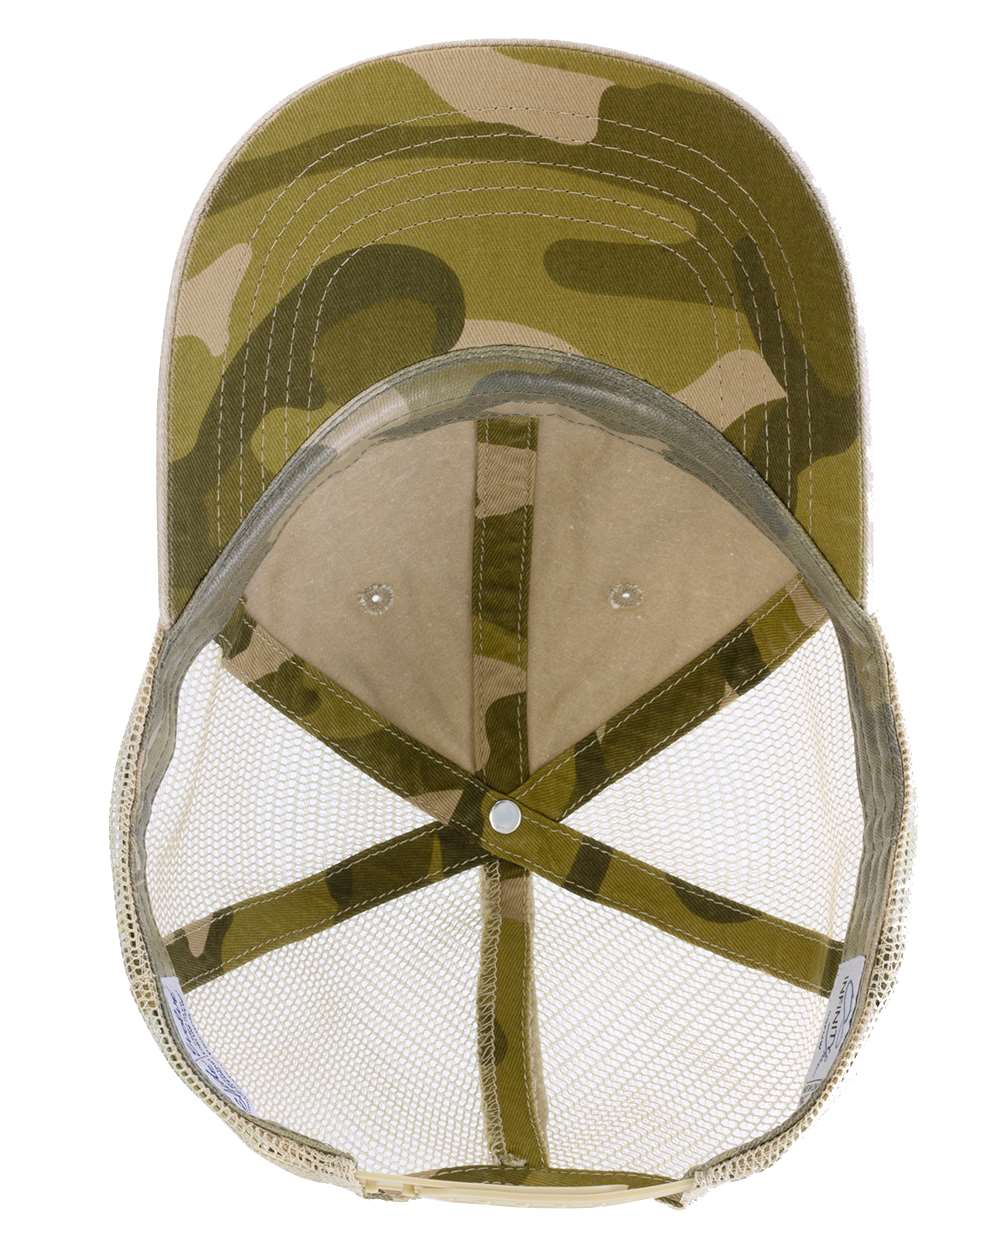  Image of the 406 Love Embroidered Khaki/Camo Ponytail Hat, featuring the iconic '406 Love' embroidery on a khaki hat with camo accents, ideal for expressing Montana pride with outdoor flair.